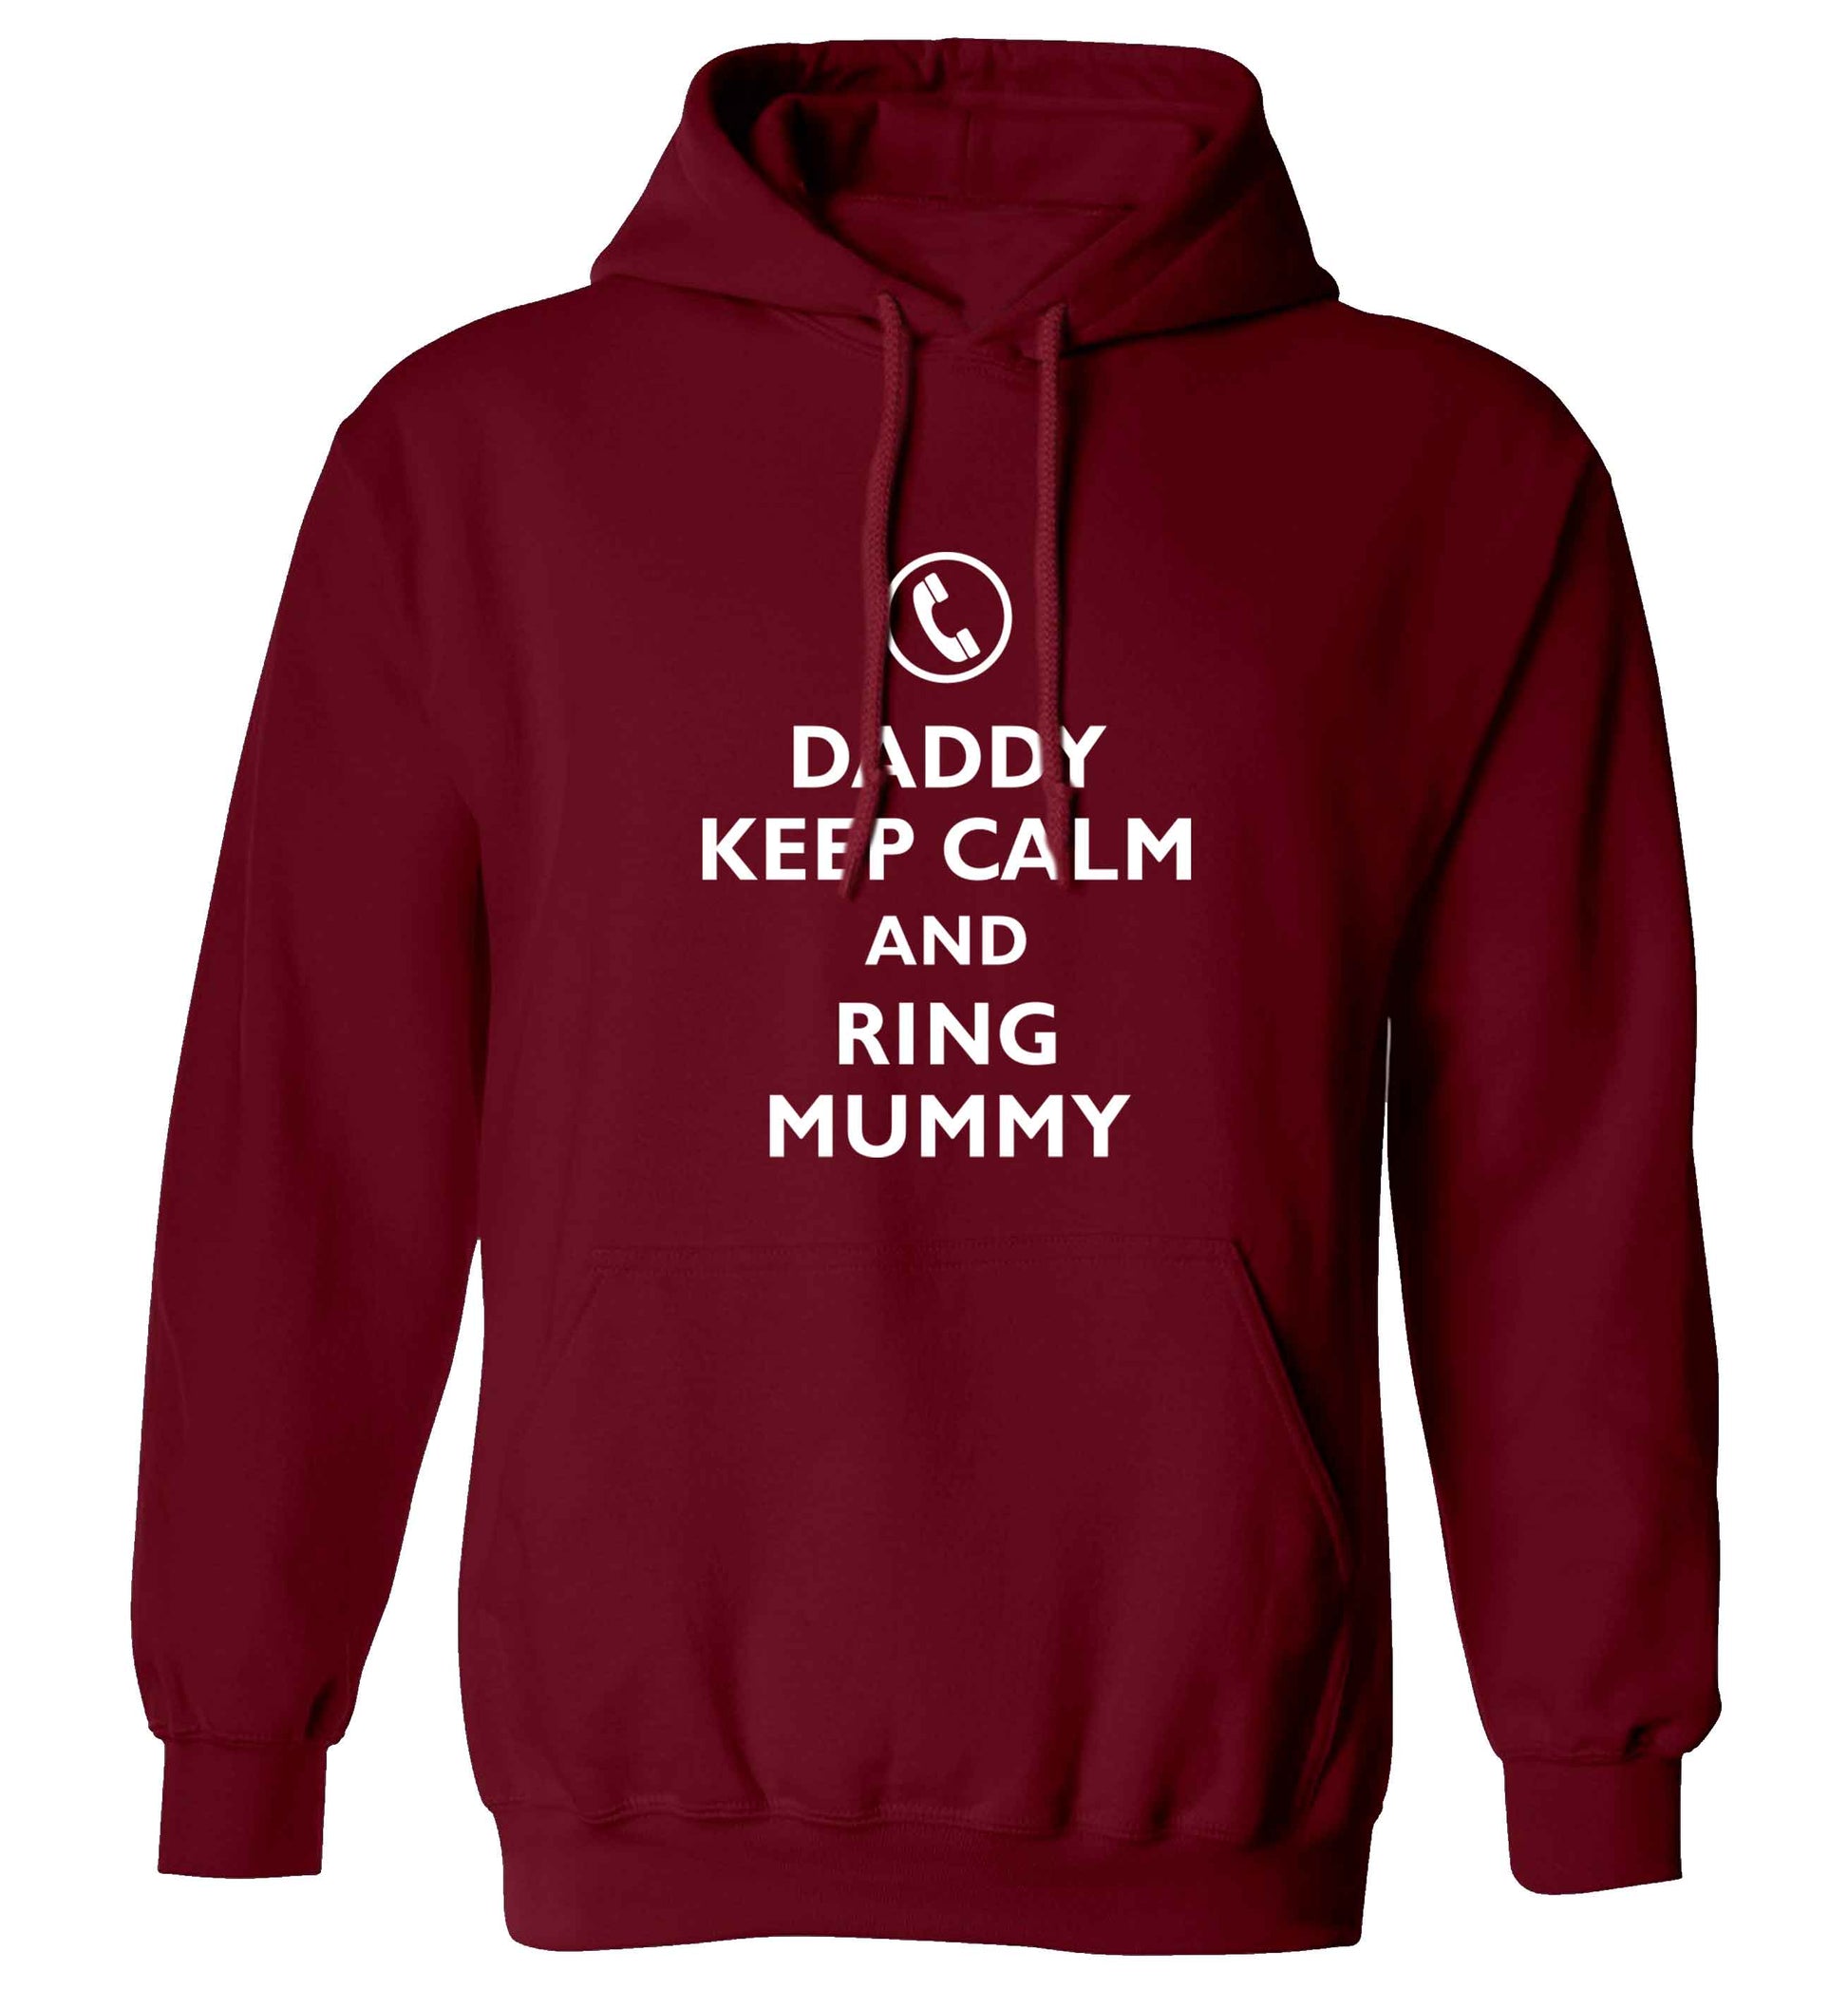 Daddy keep calm and ring mummy adults unisex maroon hoodie 2XL